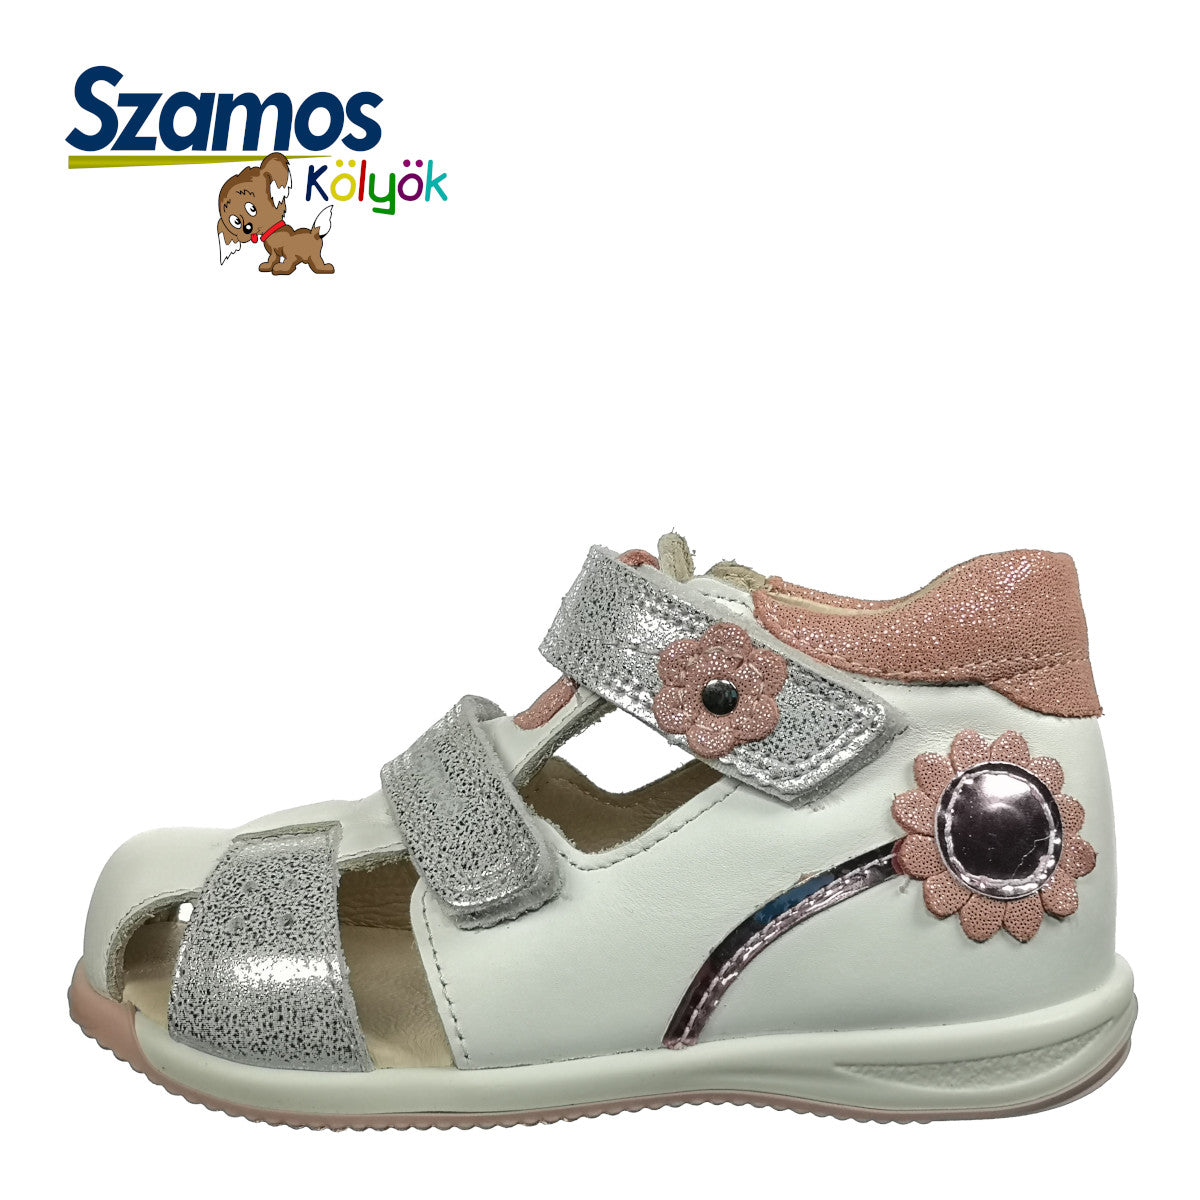 rulletrappe sandsynligt nødsituation Szamos kid girl sandals in white color and flower pattern with silver  glitter double velcro strap toddler/little kid size | TinyShoes